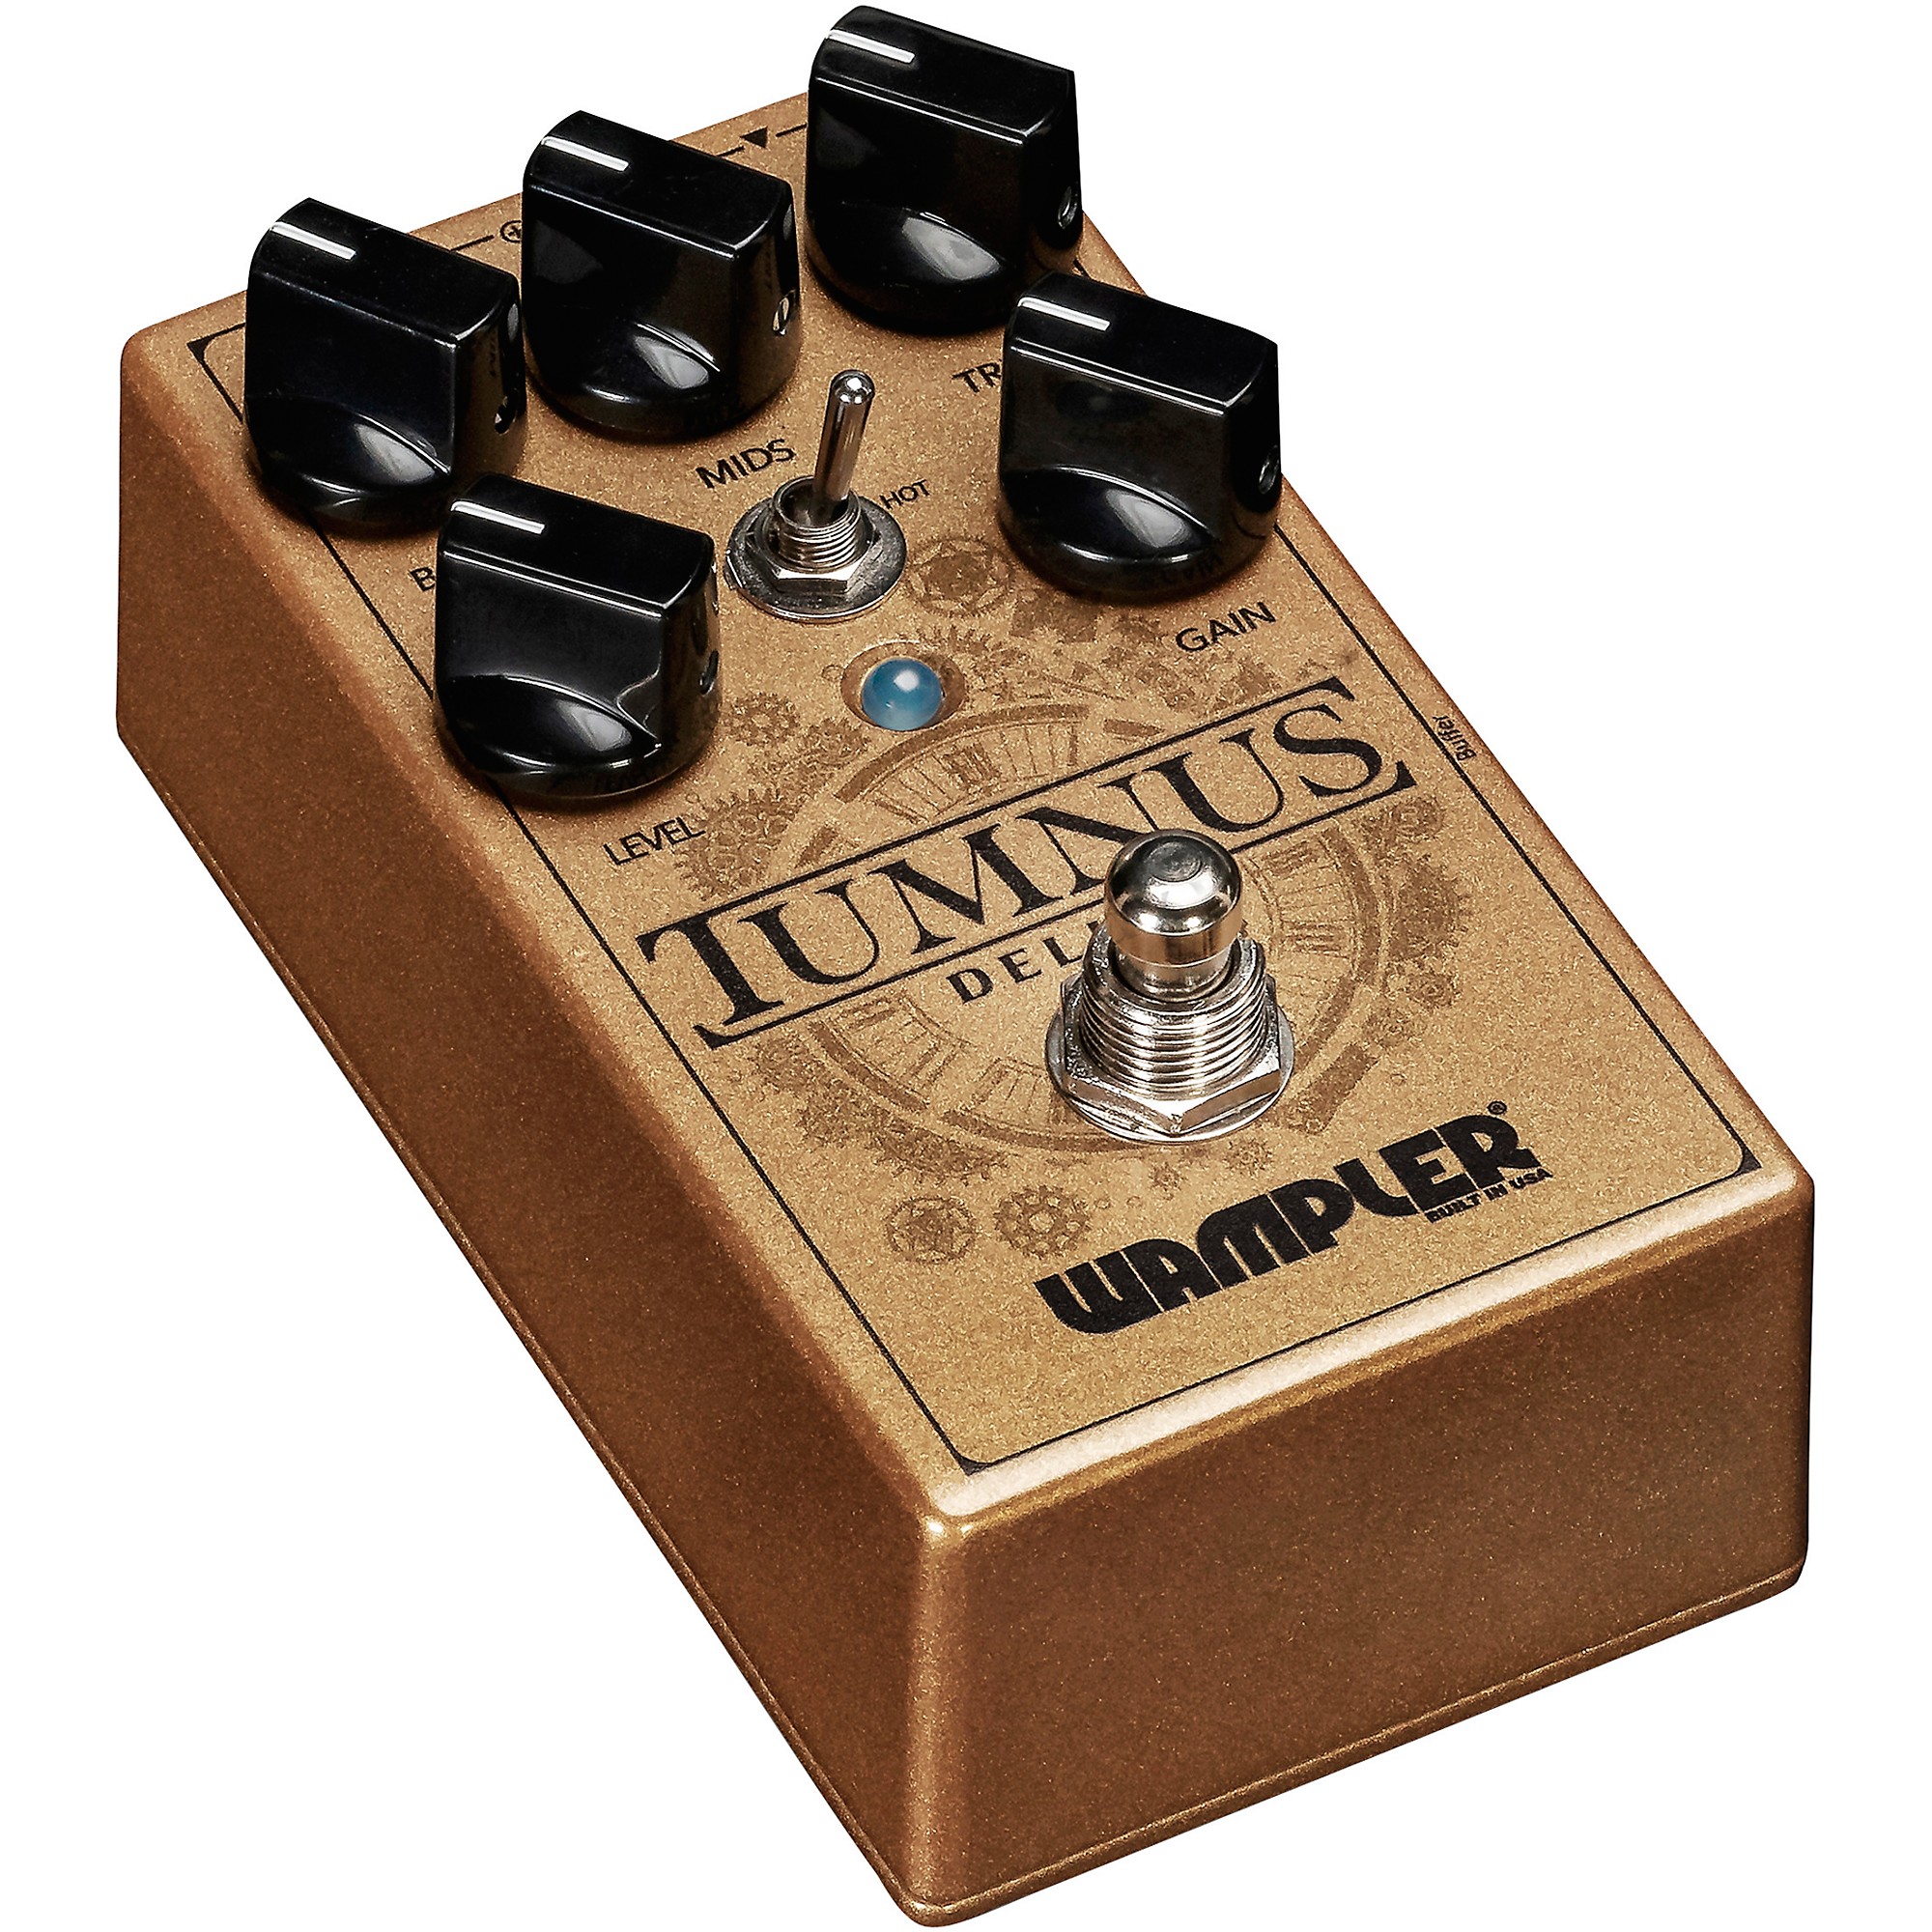 Wampler Tumnus Deluxe Overdrive Effects Pedal | Guitar Center